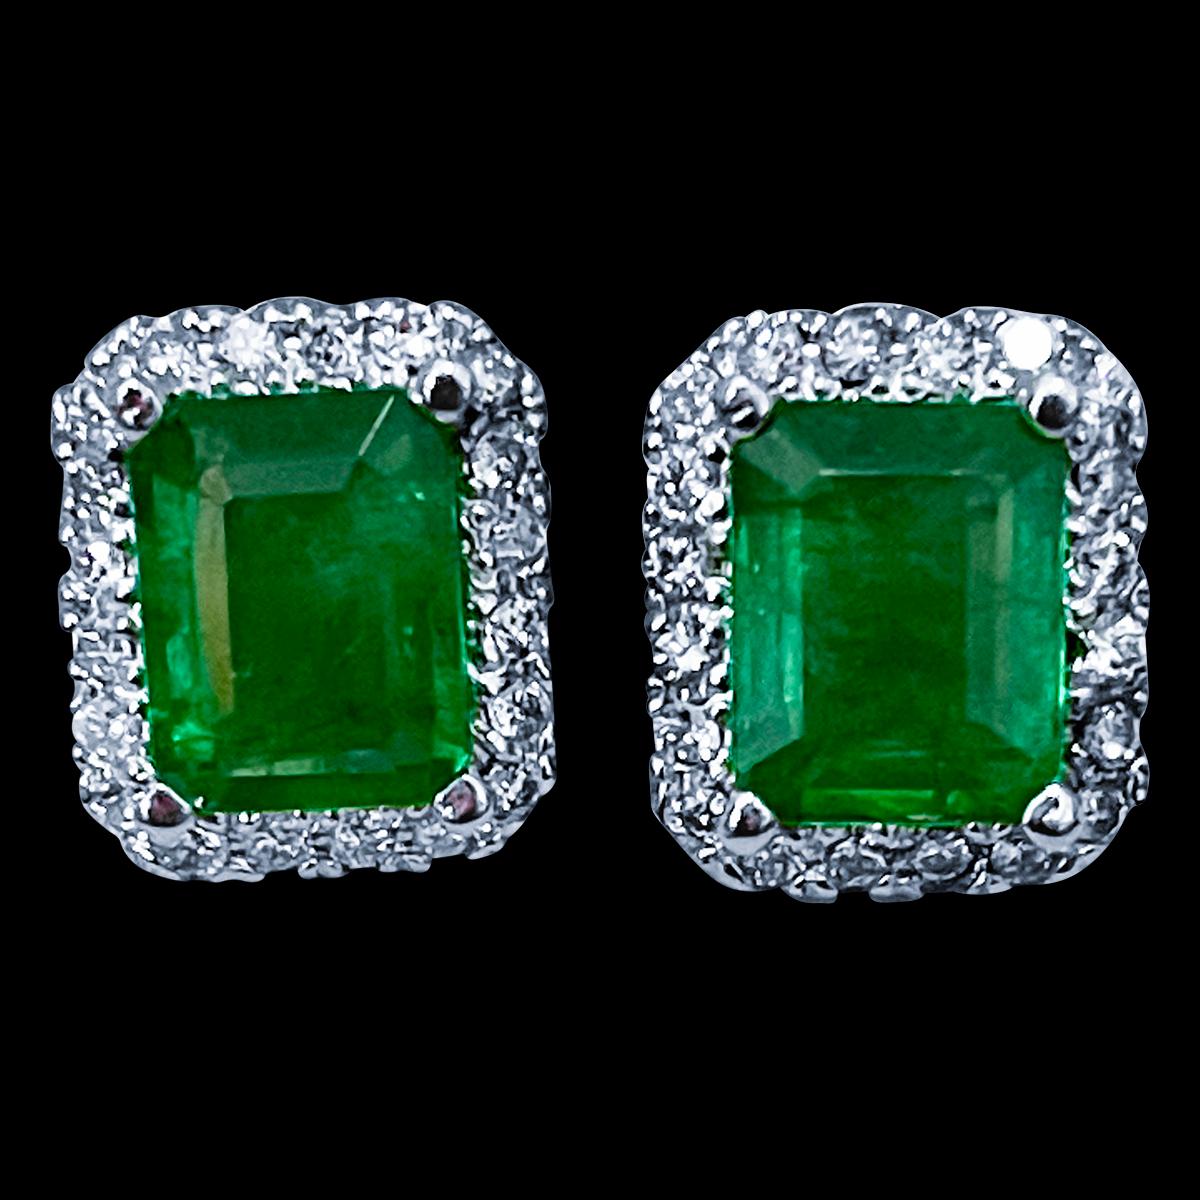 7 Carat Emerald Cut Emerald & 1.5 Ct Diamond Stud Earrings 14 Karat White Gold
This exquisite pair of earrings are beautifully crafted with 14 karat White gold .
Weight of 14 K gold 4.75 Grams with emeralds
Origin Zambian
Natural Stone
Each emerald